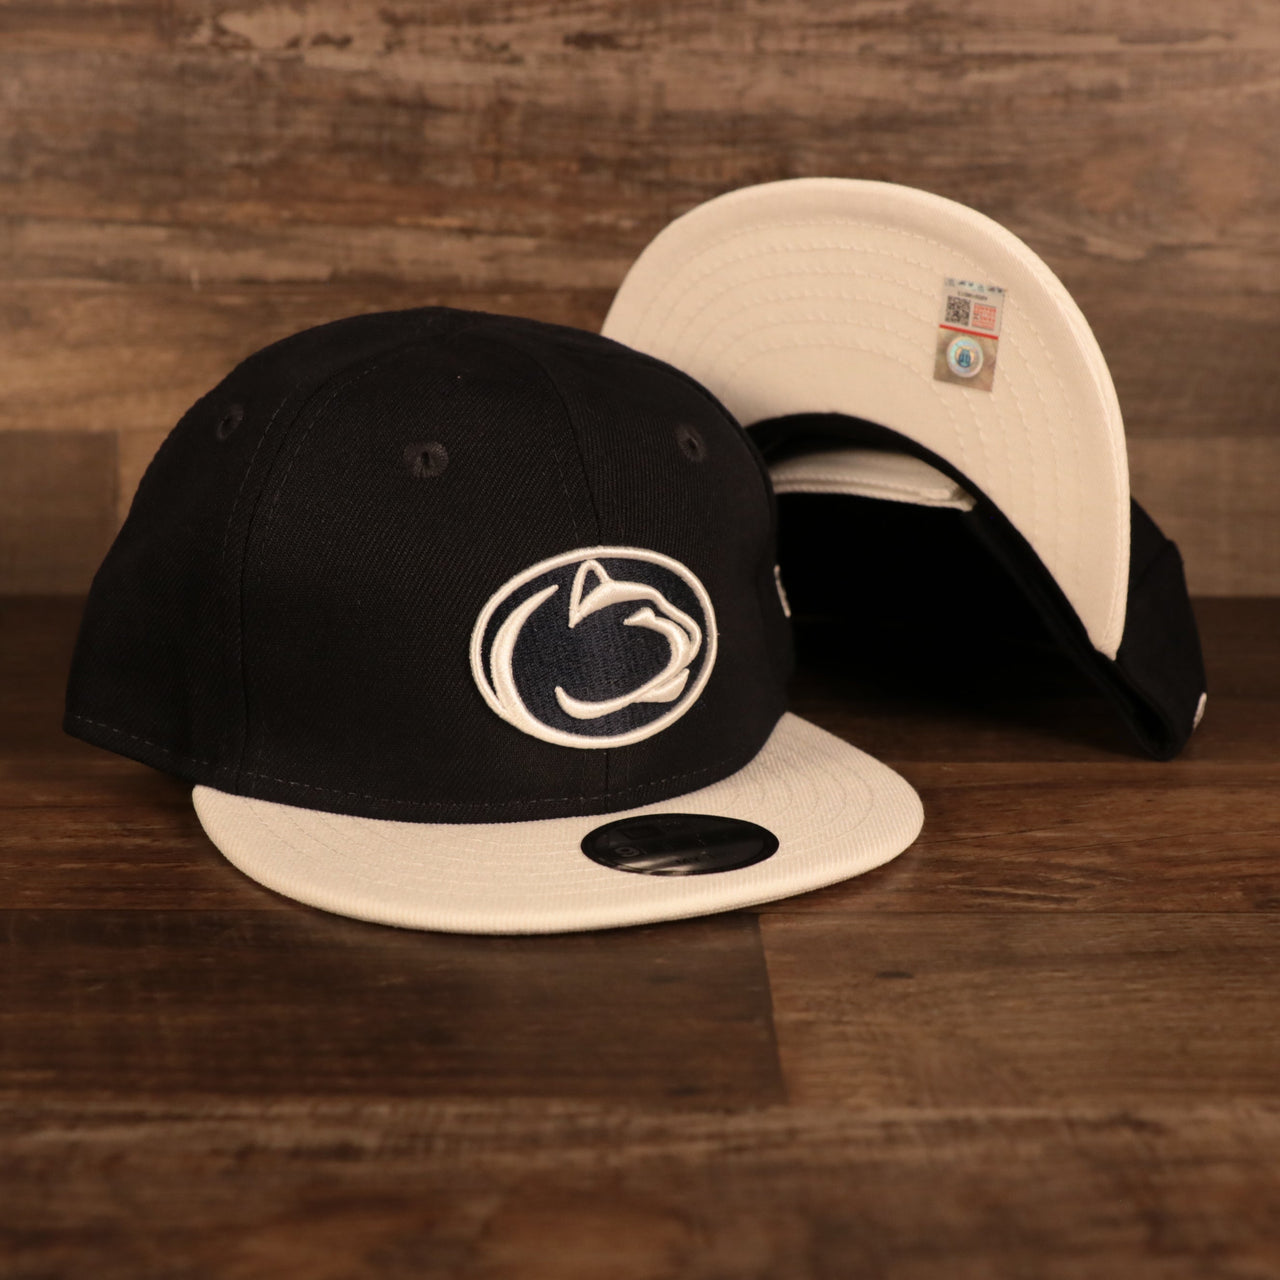 Penn State Nittany Lions My 1st 9Fifty Baby Snapback Hat | Navy/White